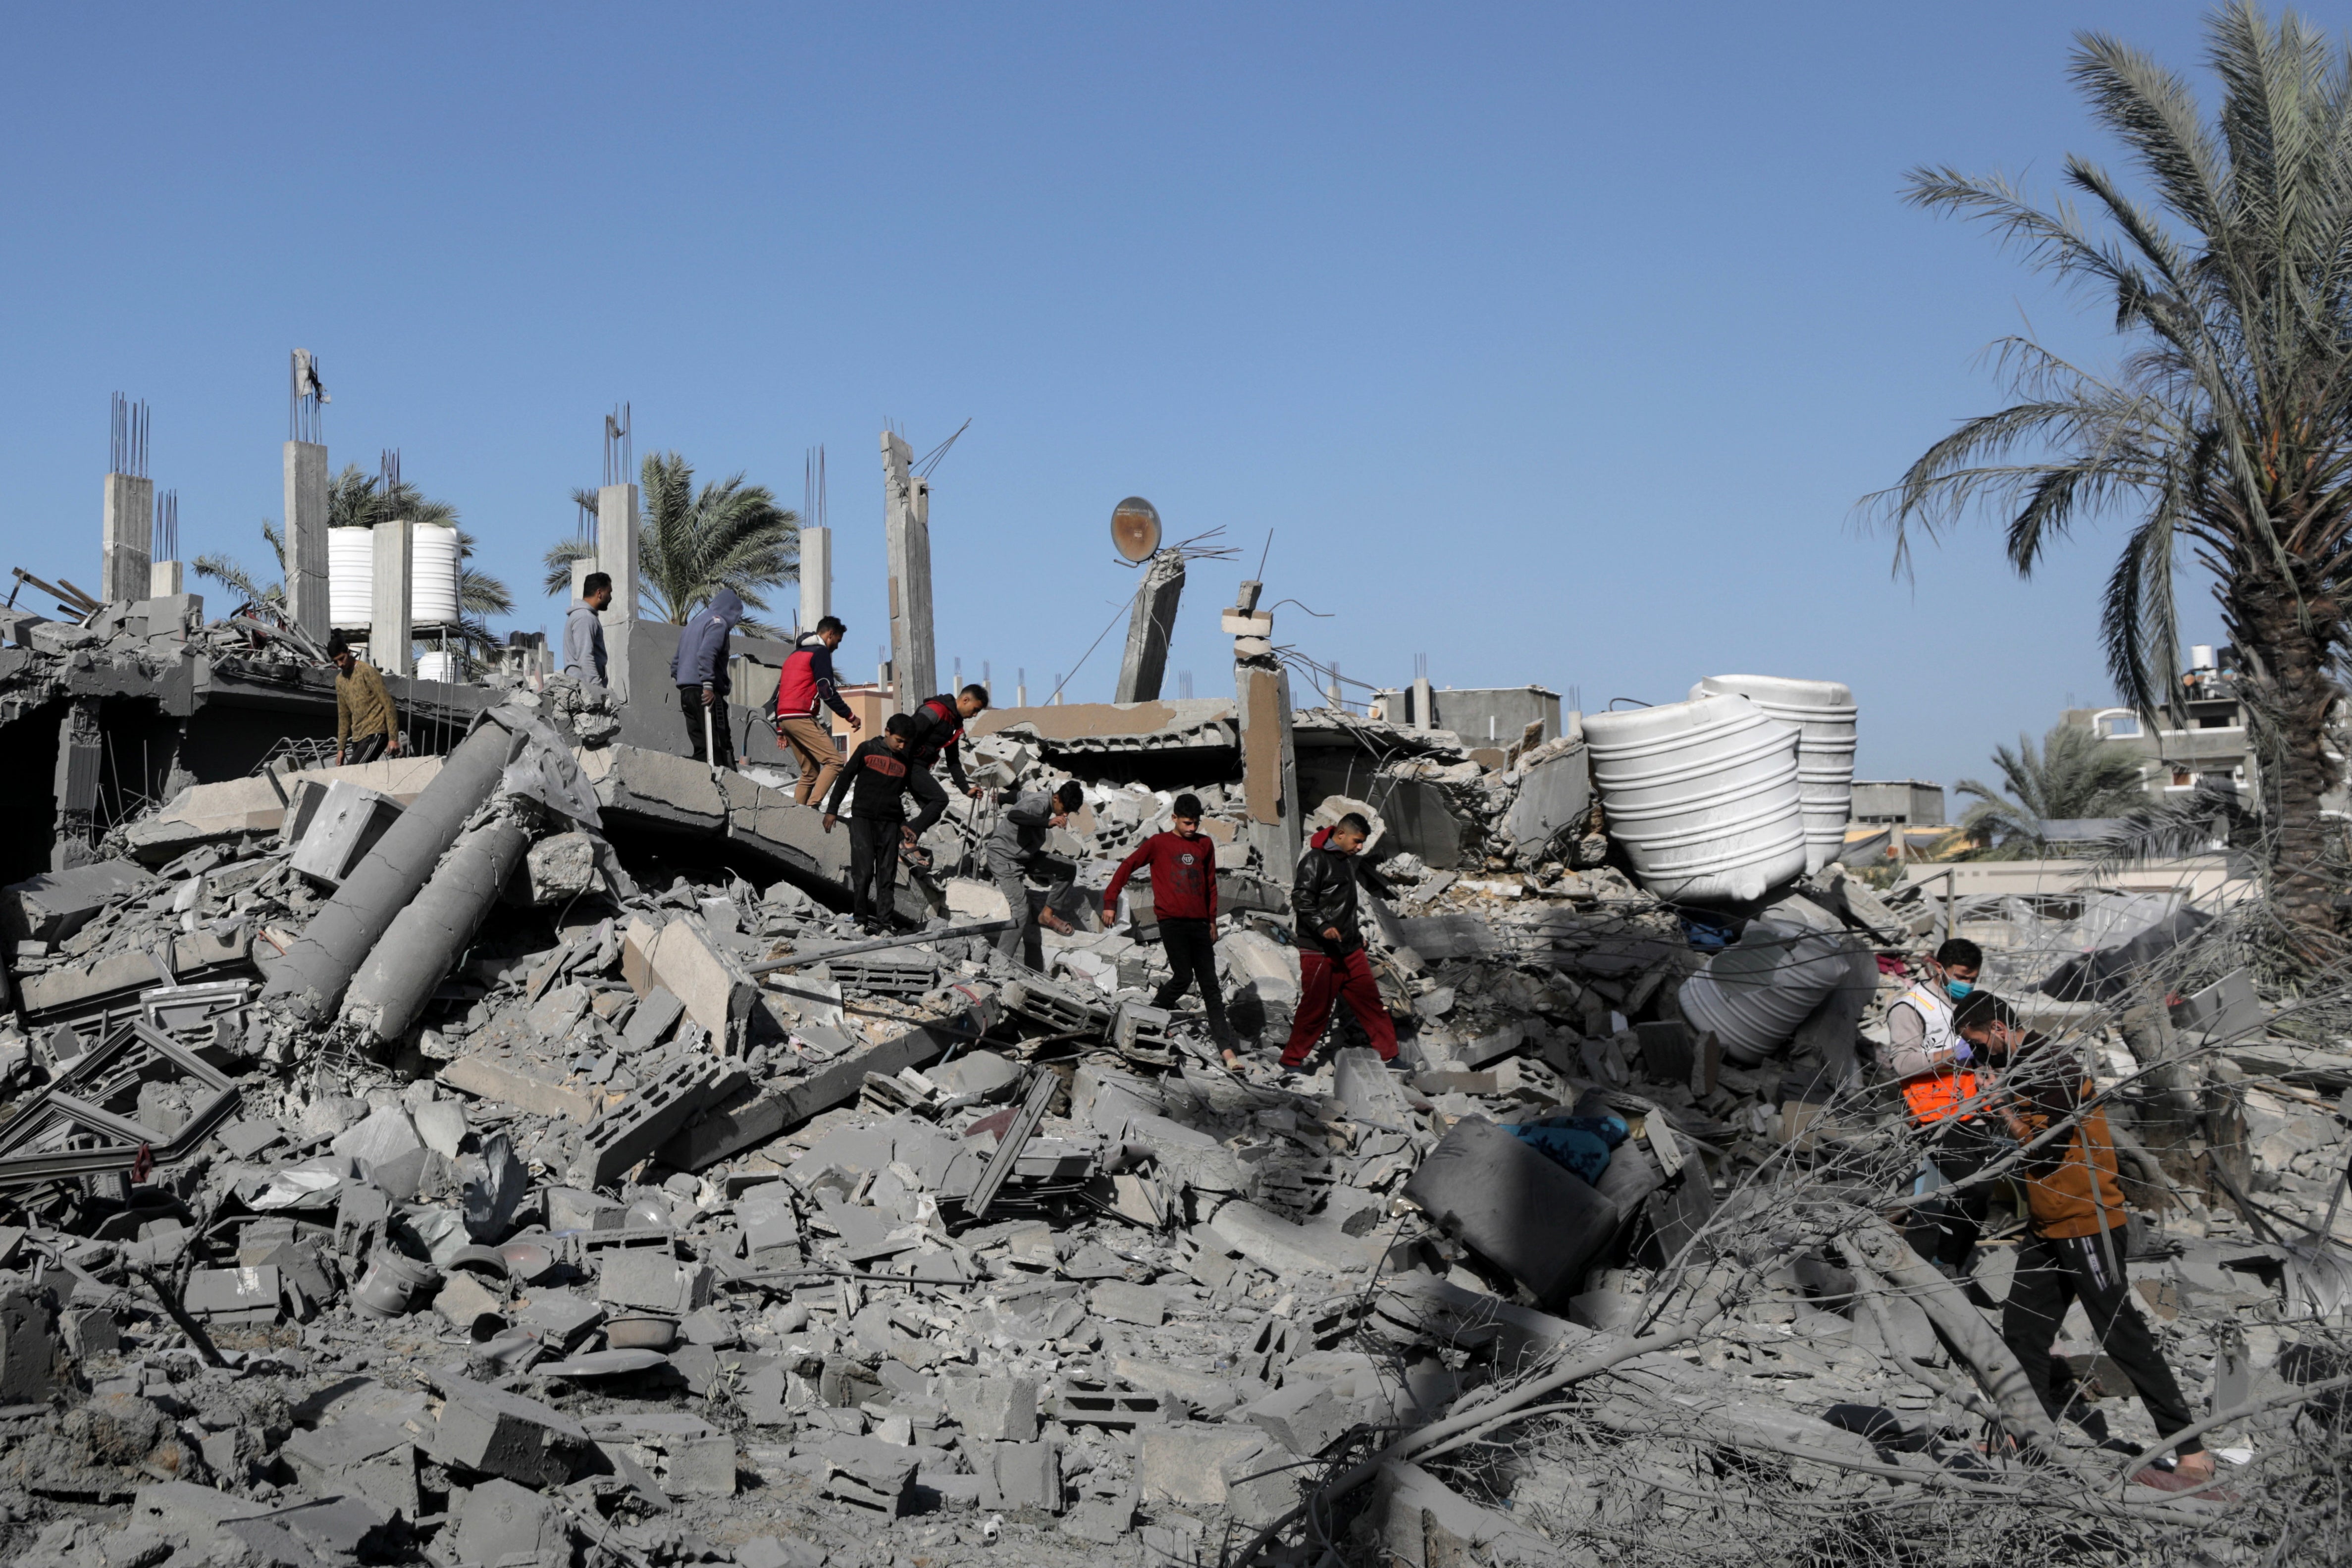 Palestinians walk among rubble of buildings in Al-Nuseirat refugee camp in Gaza on 22 December after it was bombed by Israeli airstrikes.